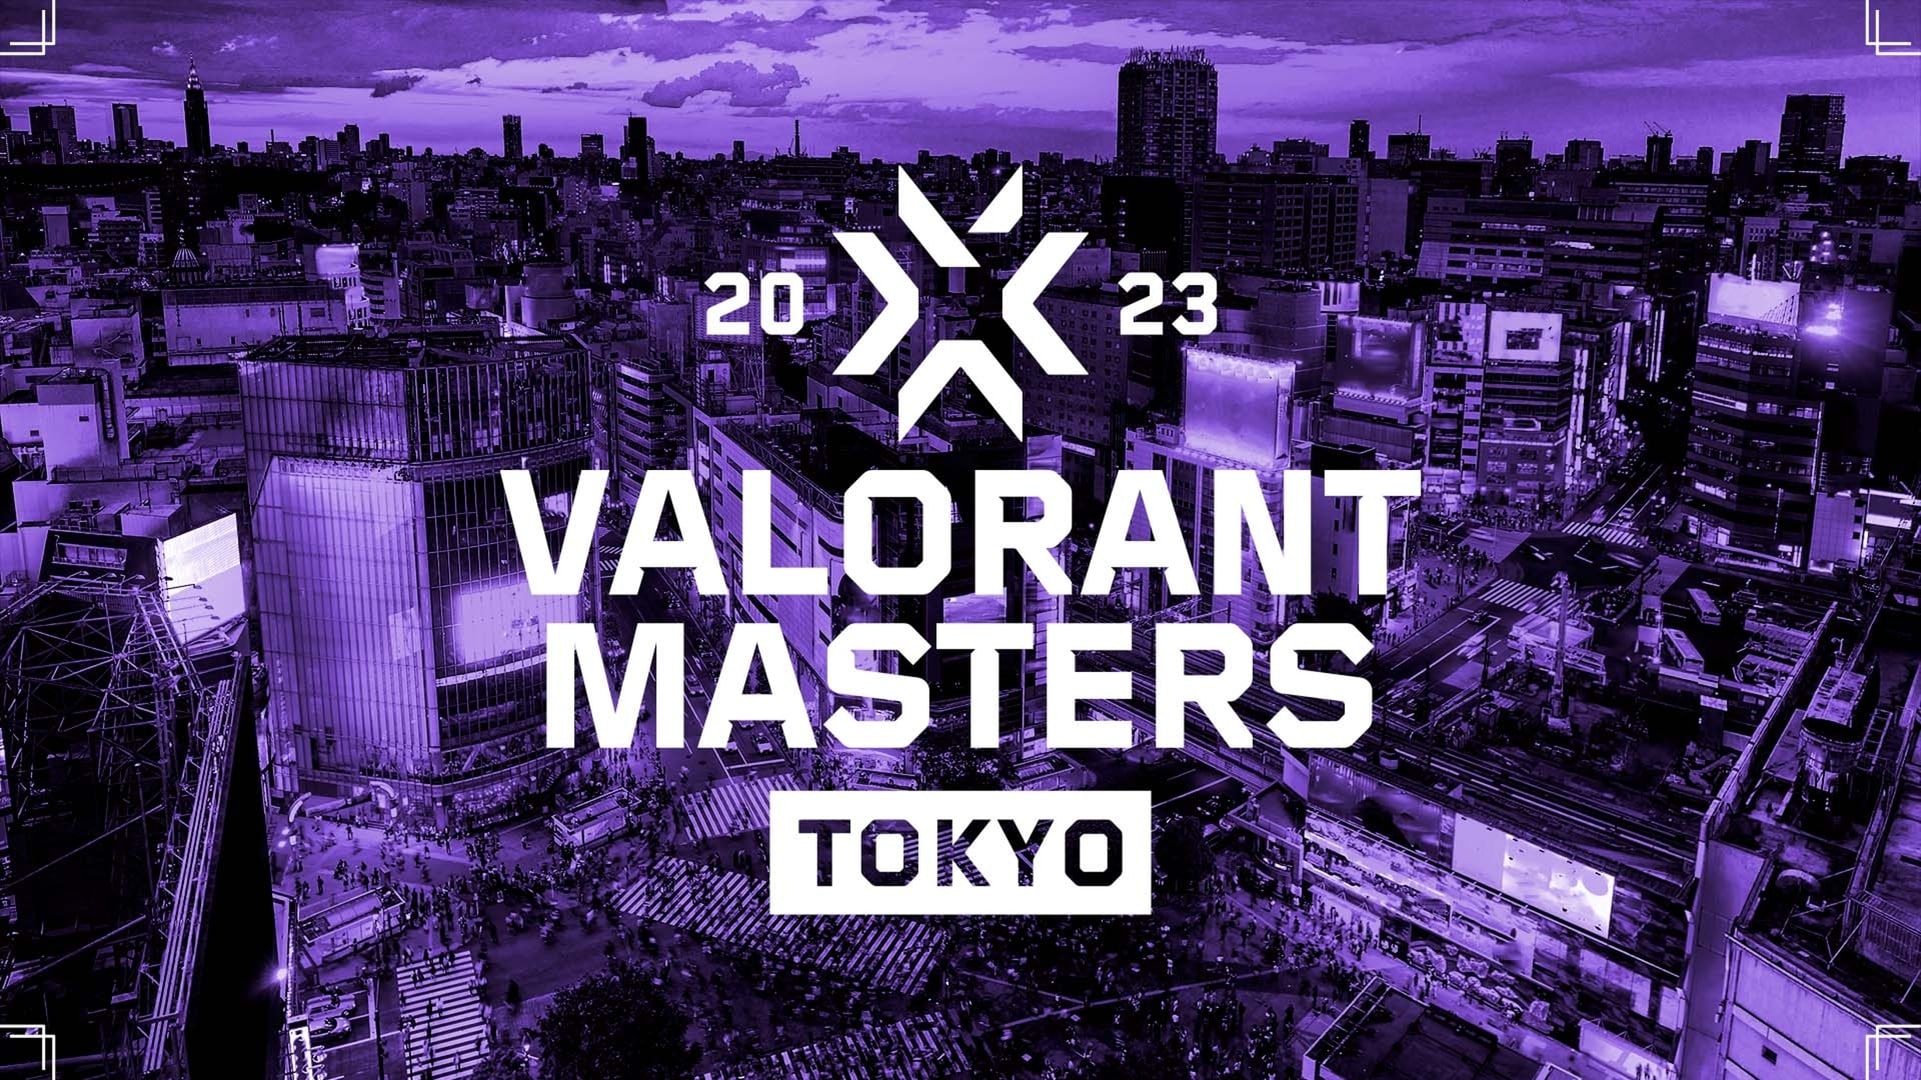 All Agent Pick Rates in VCT Masters Tokyo 2023 title card.